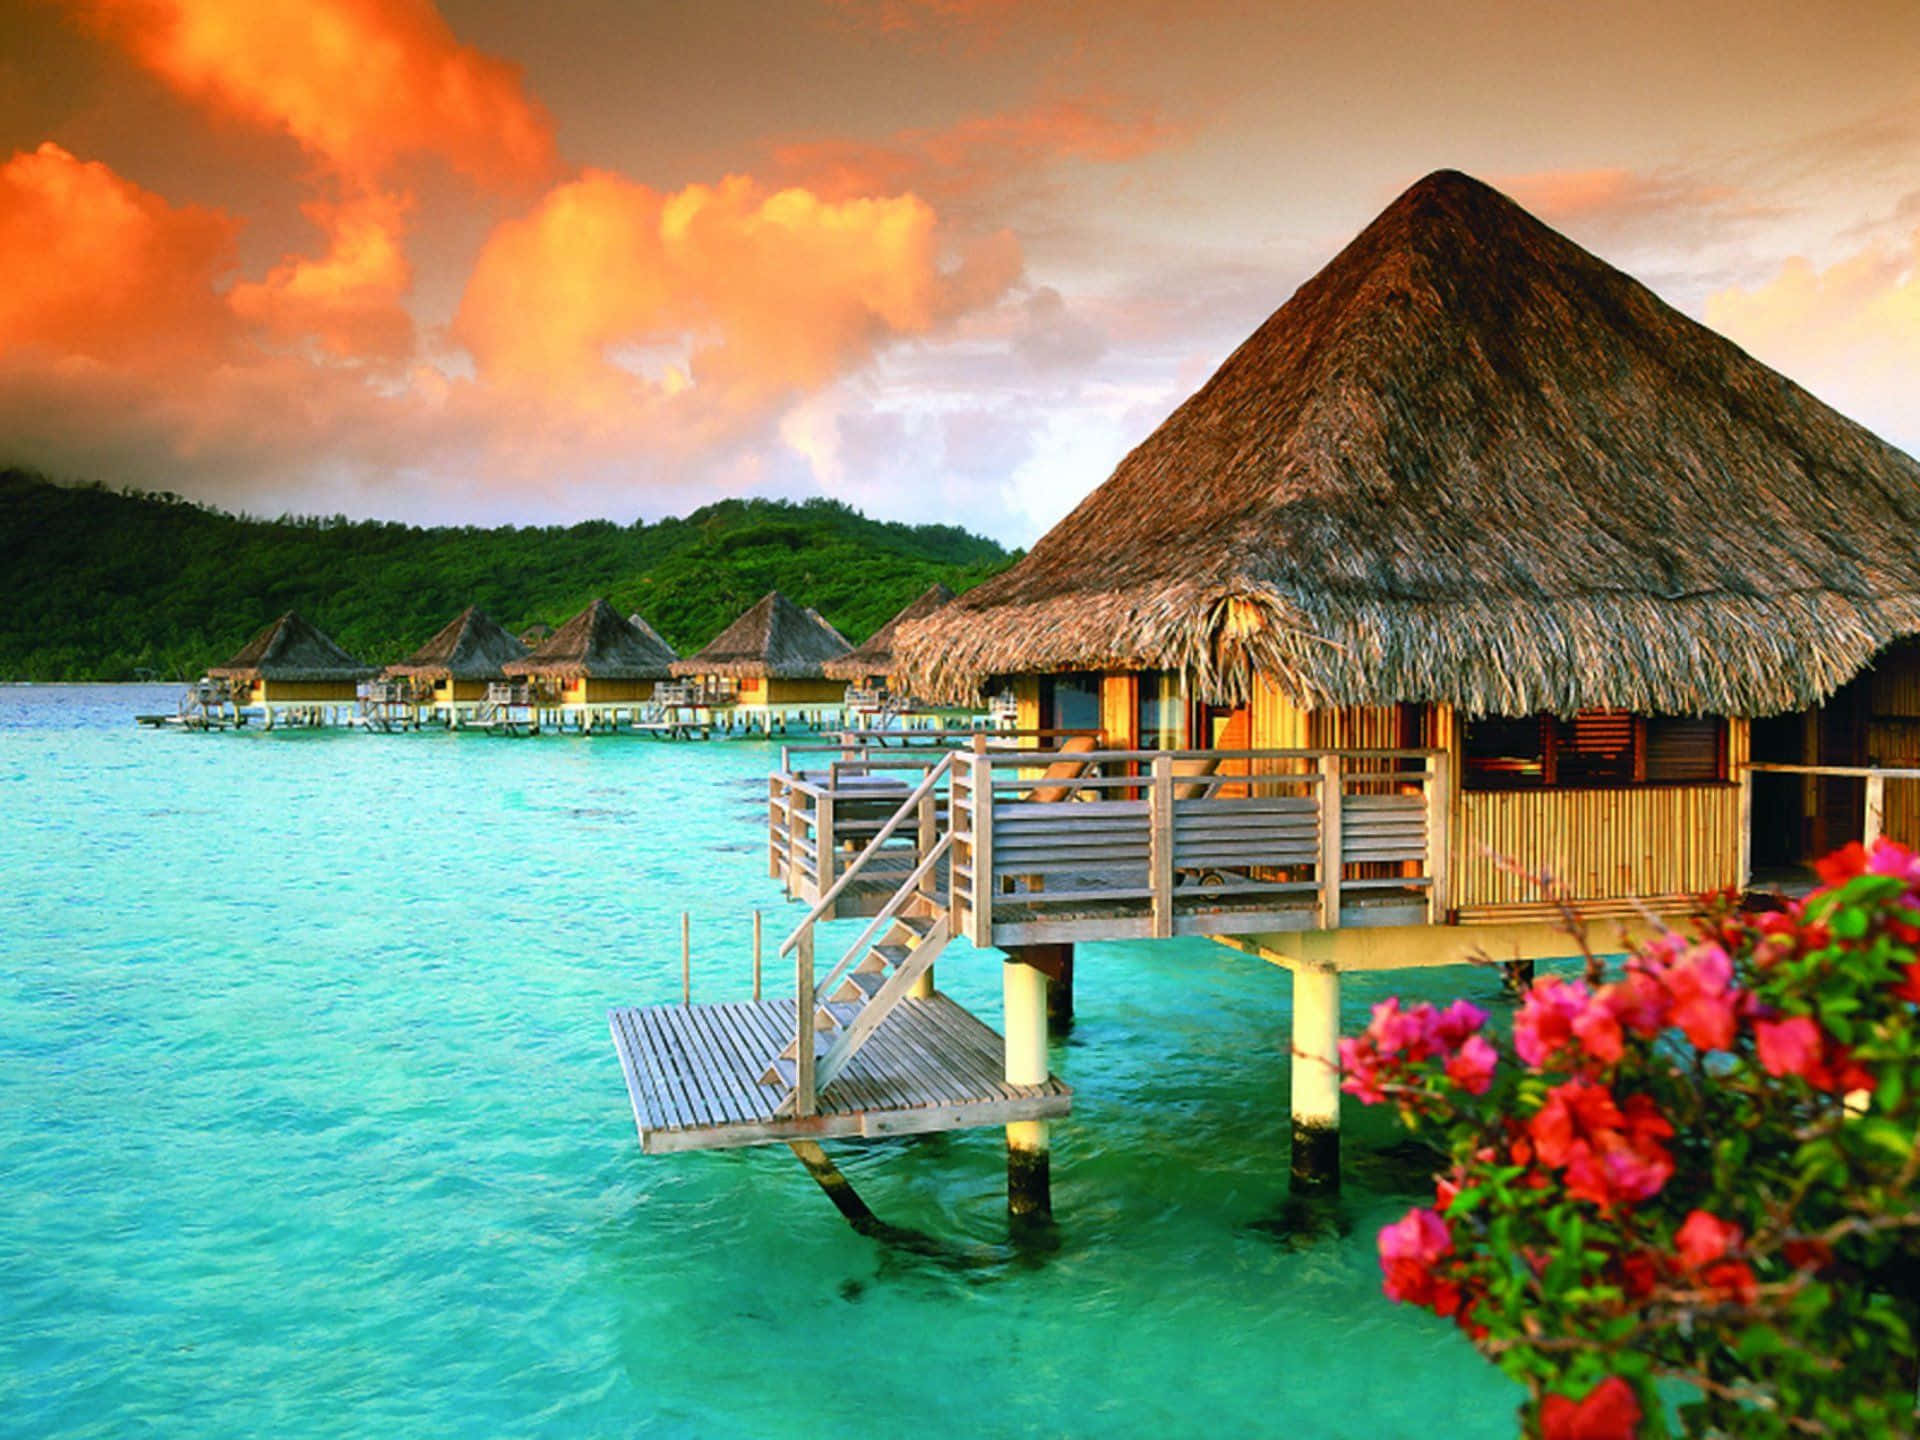 A Hut On The Ocean With Flowers And A Sunset